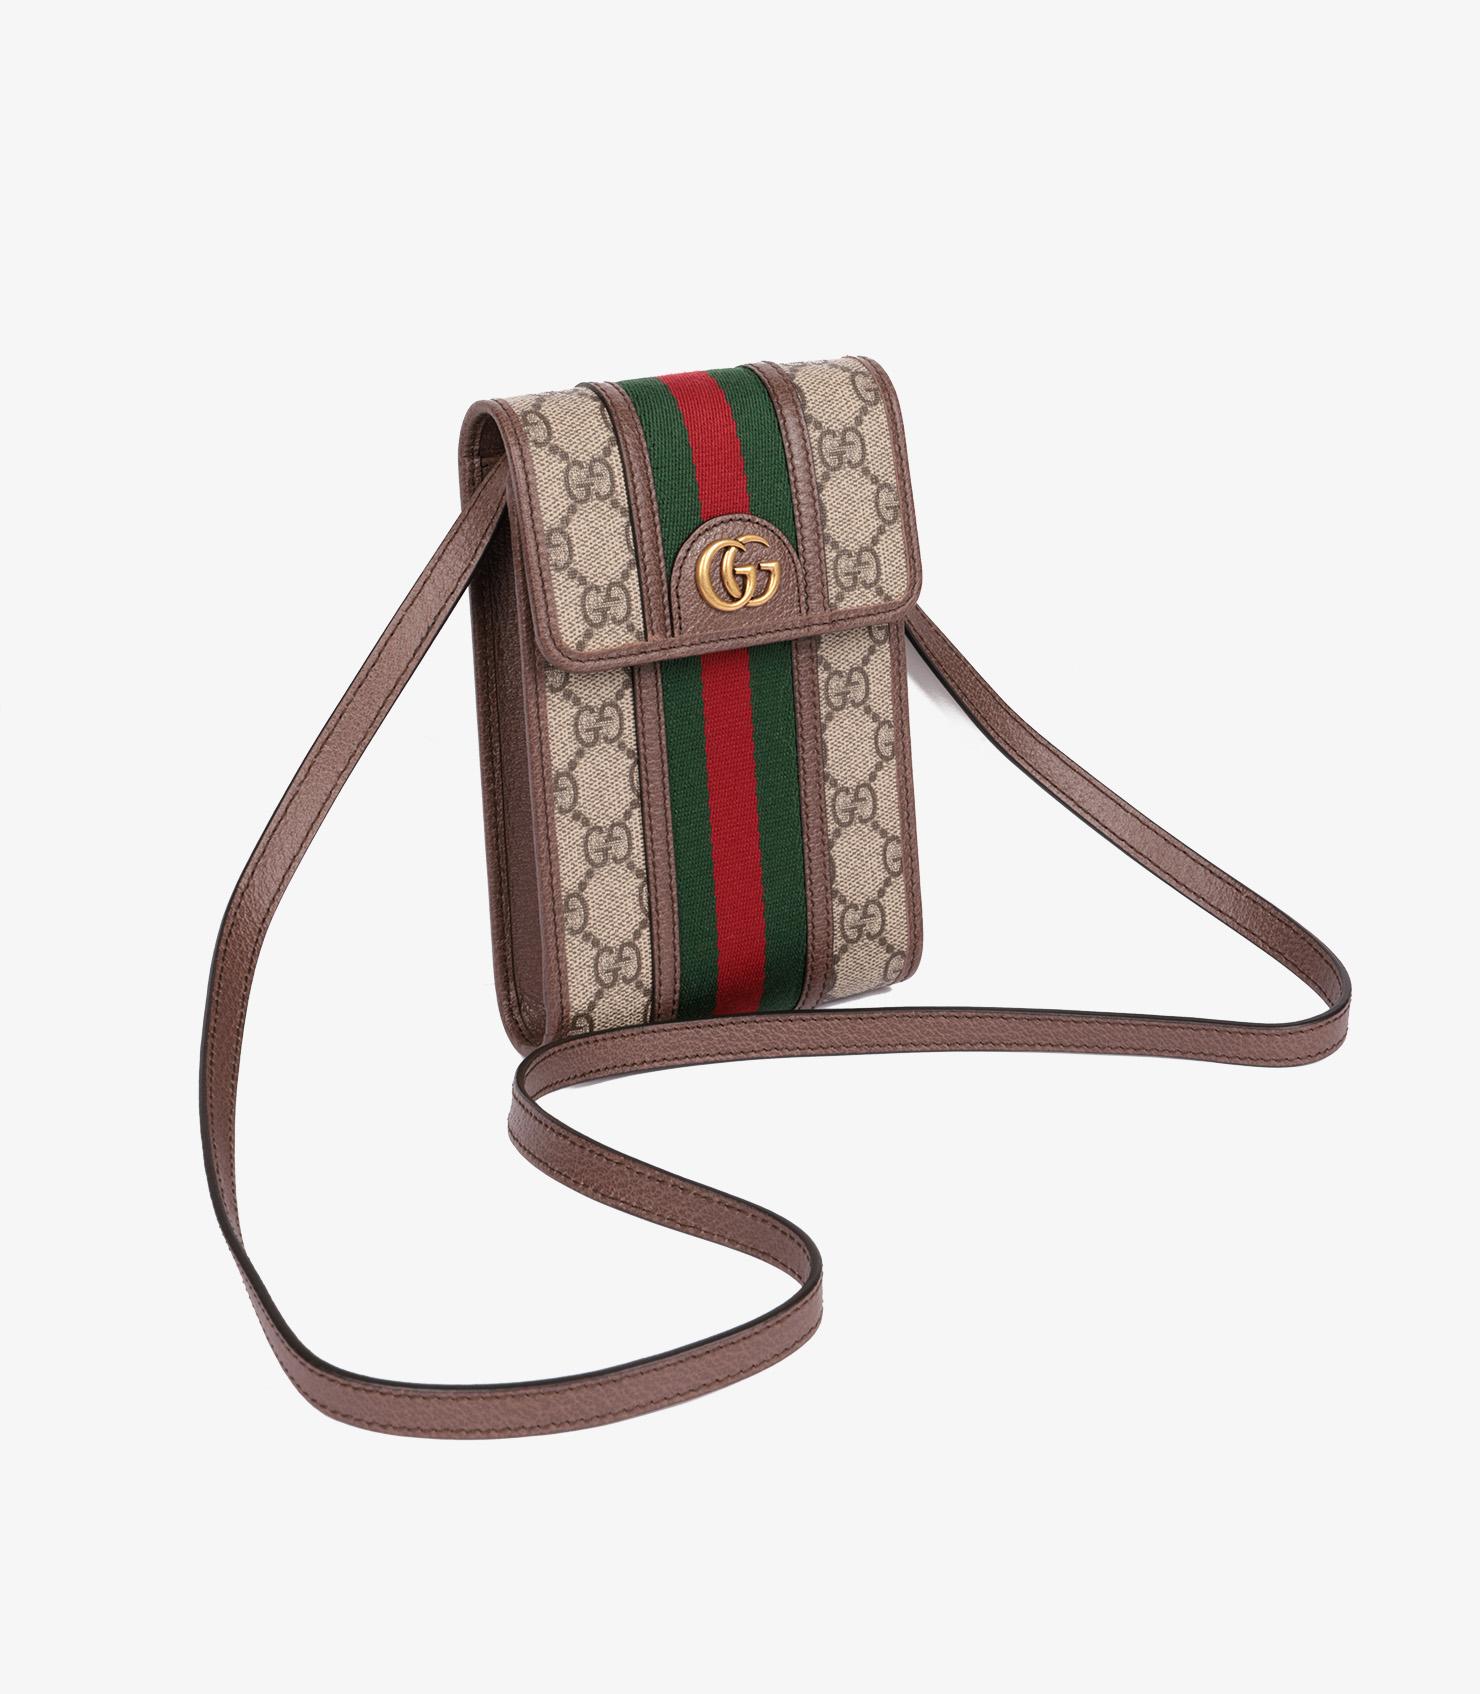 Gucci Beige Coated Canvas GG Supreme & Web Ophidia Messenger Phone Holder

Brand- Gucci
Model- Gucci
Product Type- Tech Accessory
Serial Number- 62*********
Accompanied By- Gucci Dust Bag, Box
Colour- Brown, Green, Red
Hardware- Gold
Material(s)-